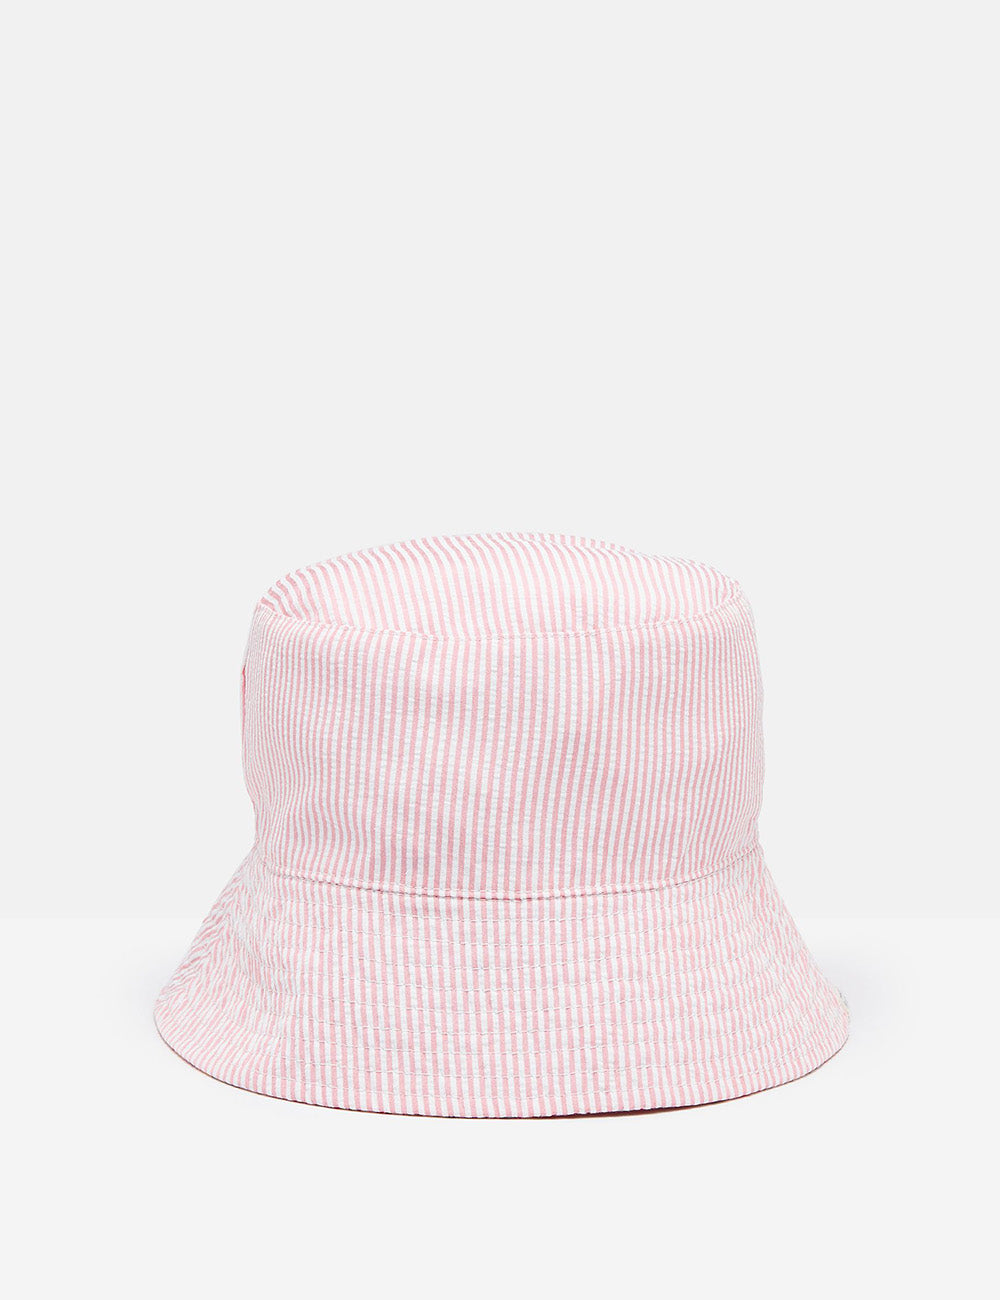 Joules Bayley Bucket Hat - White